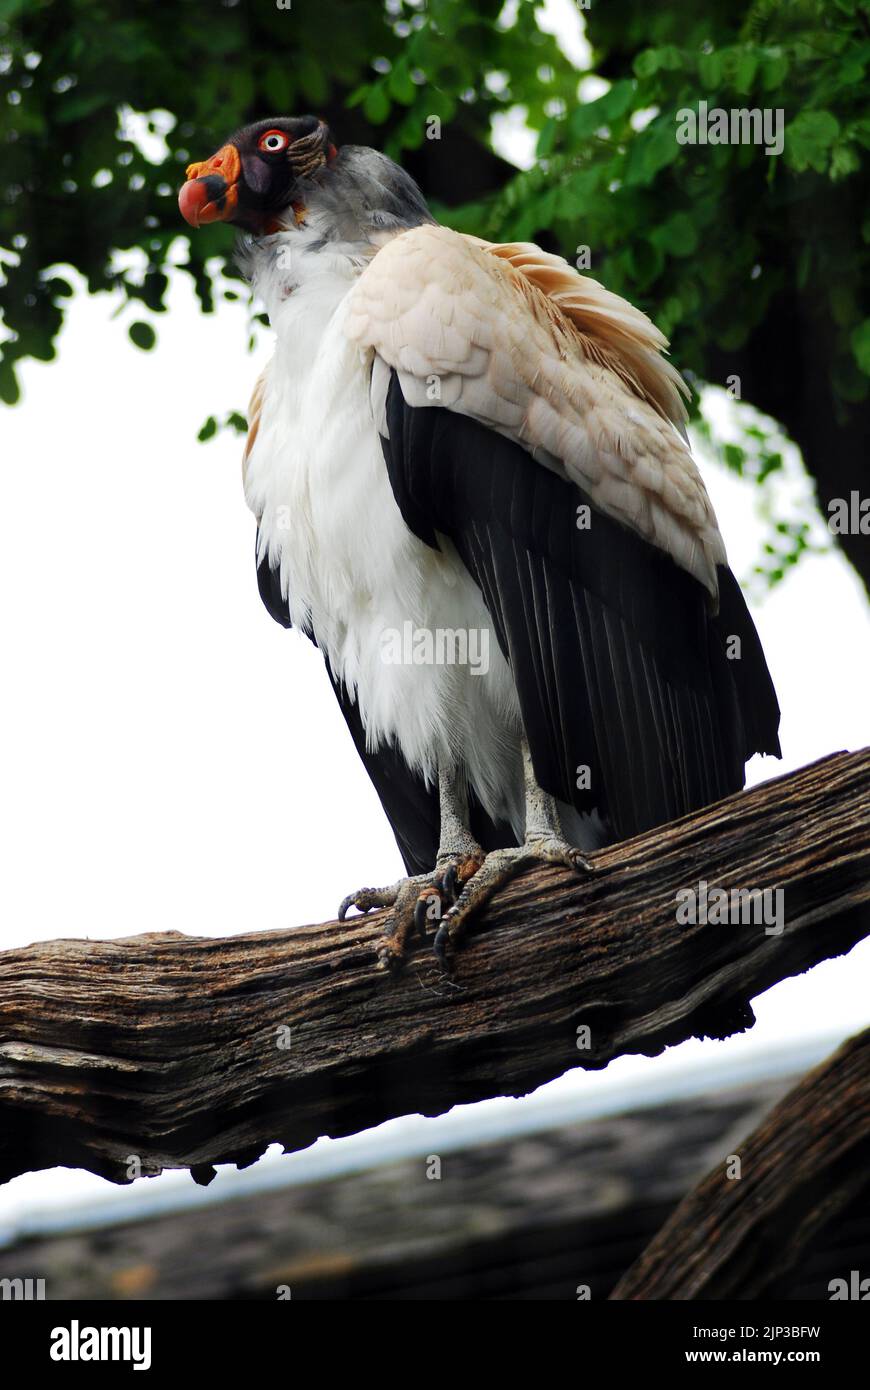 King vulture (Sarcoramphus papa). This large birdie  found in Central and South America. It is a member of the New World vulture family, Cathartidae. Stock Photo